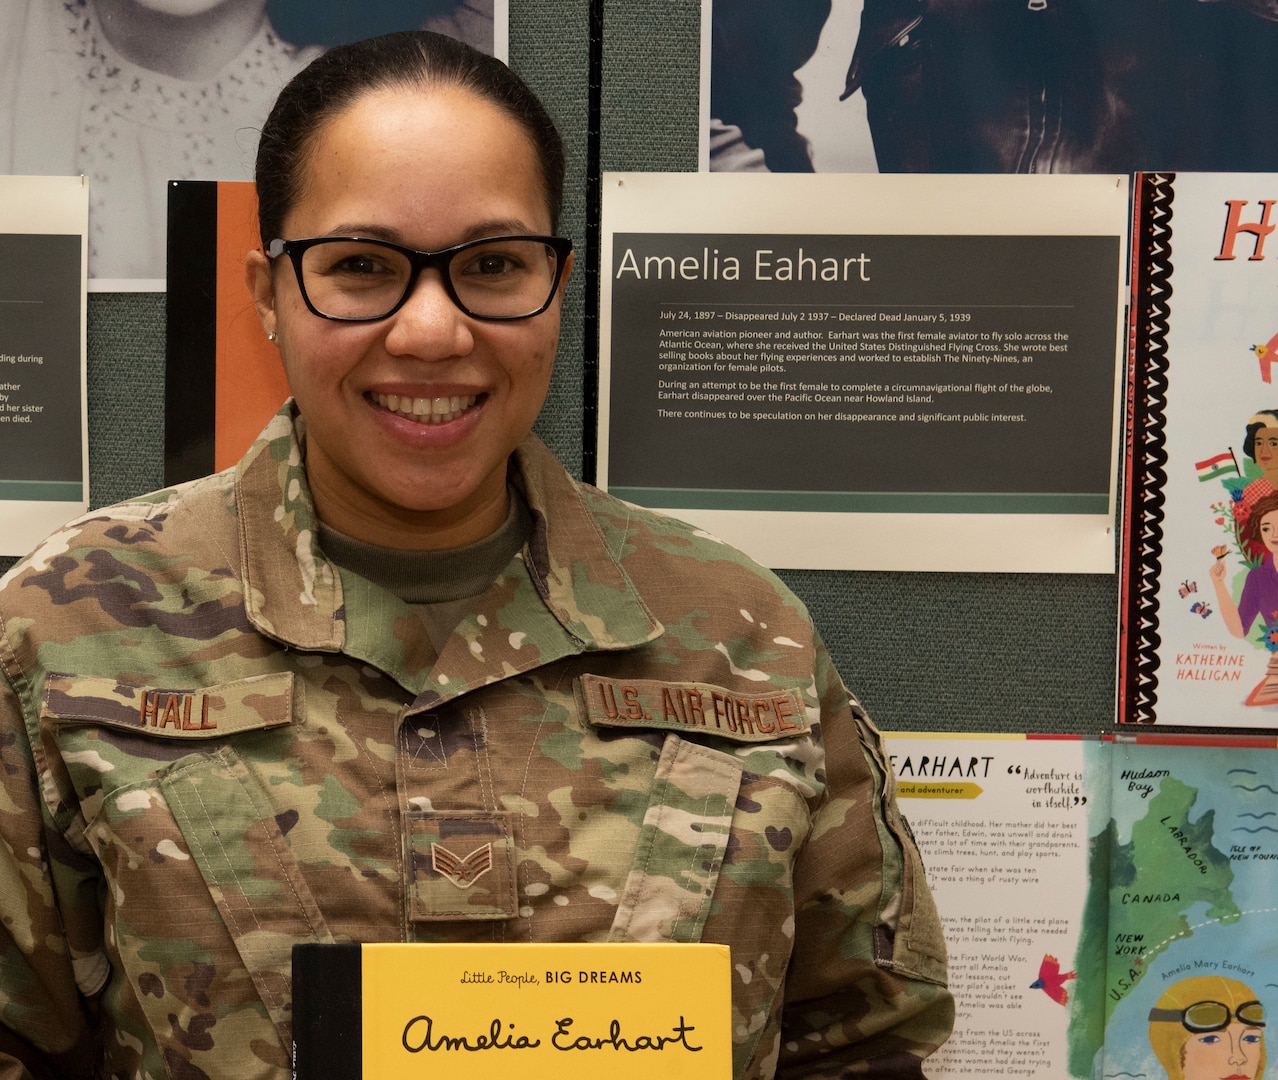 Idaho Soldier paves way for junior enlisted infantry women as